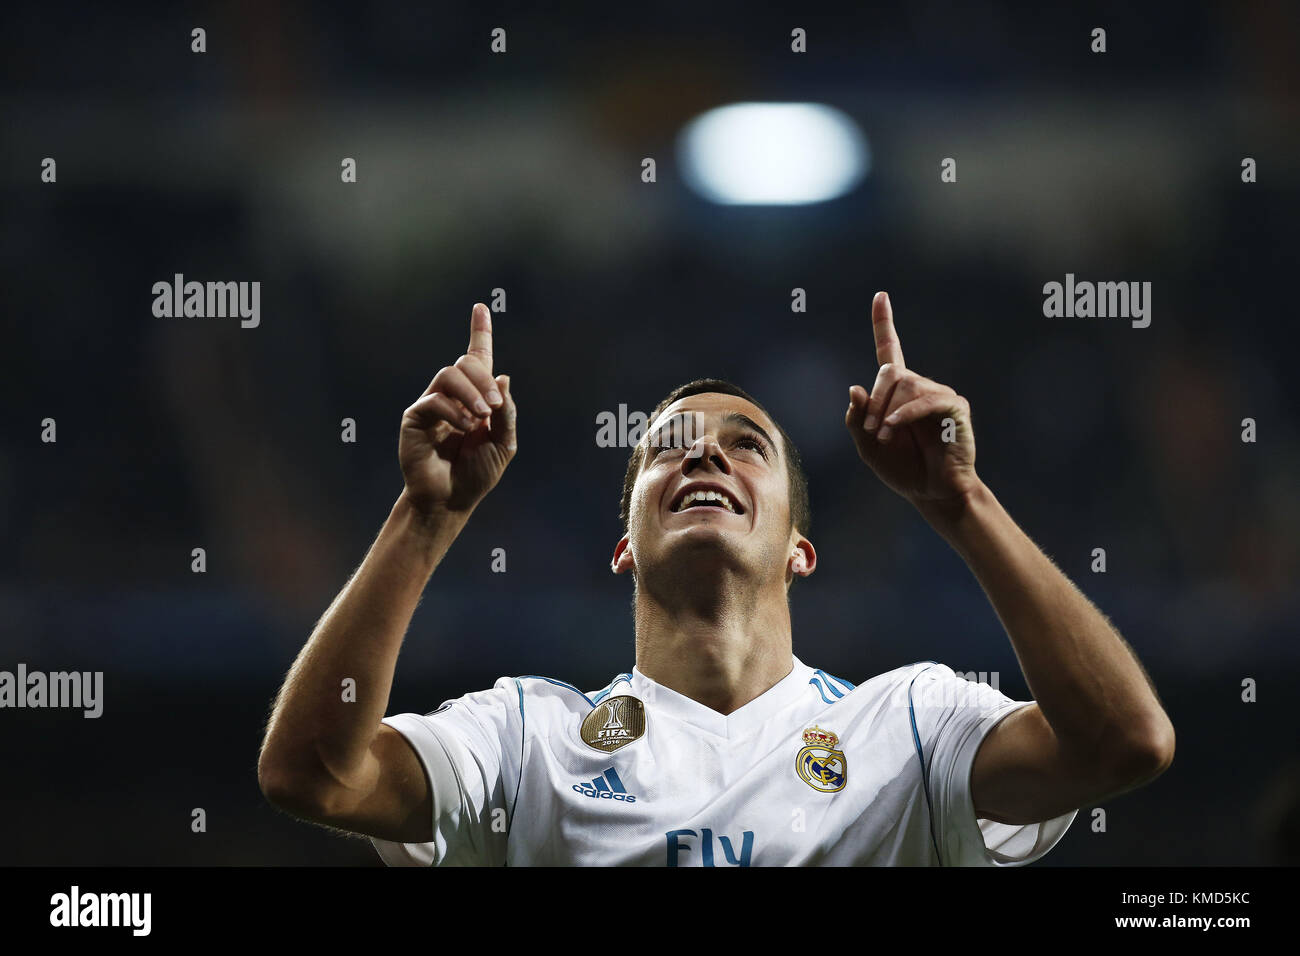 Madrid, Spain. 6th Dec, 2017. Lucas Vazquez of Real Madrid celebrates after scoring a goal to make it 3-2 during the UEFA Champions League group H match between Real Madrid and Borussia Dortmund at Santiago Bernabéu. Credit: Manu reino/SOPA/ZUMA Wire/Alamy Live News Stock Photo